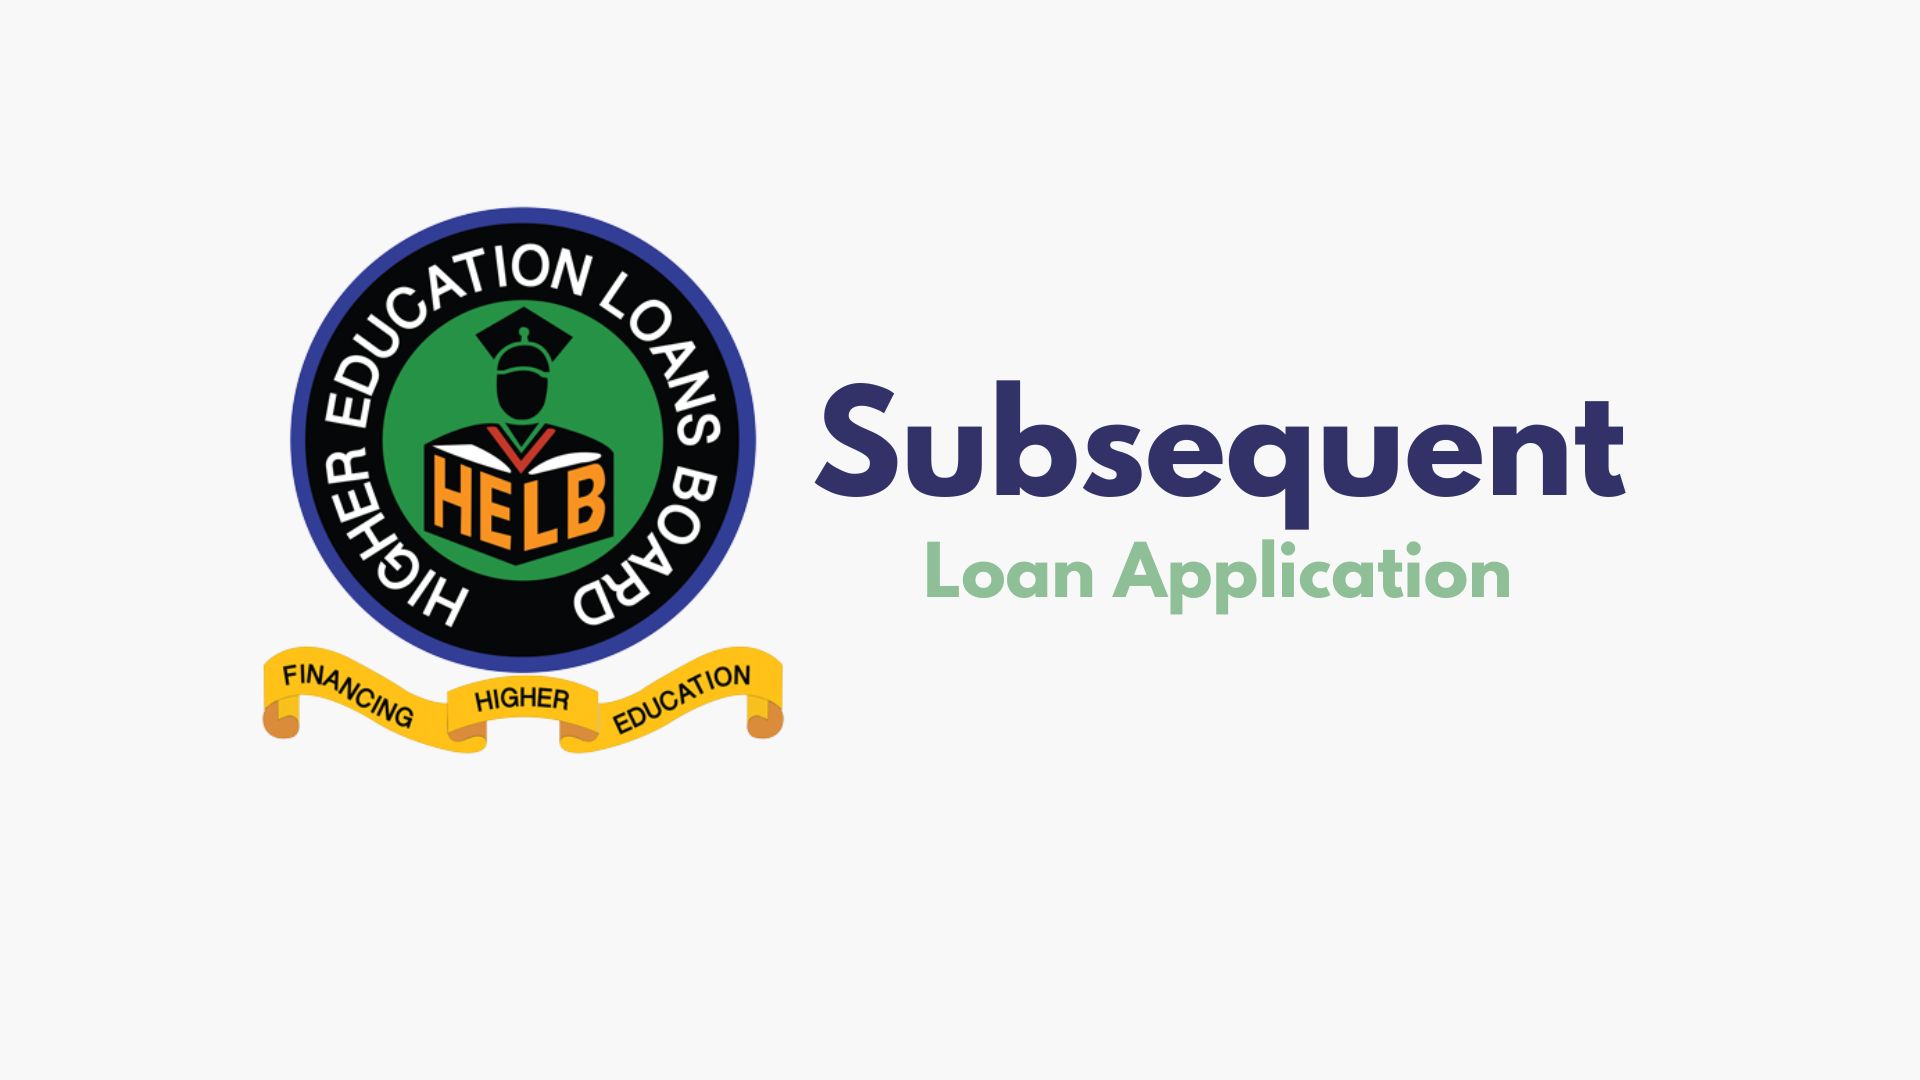 Helb opens portal for subsequent loan application